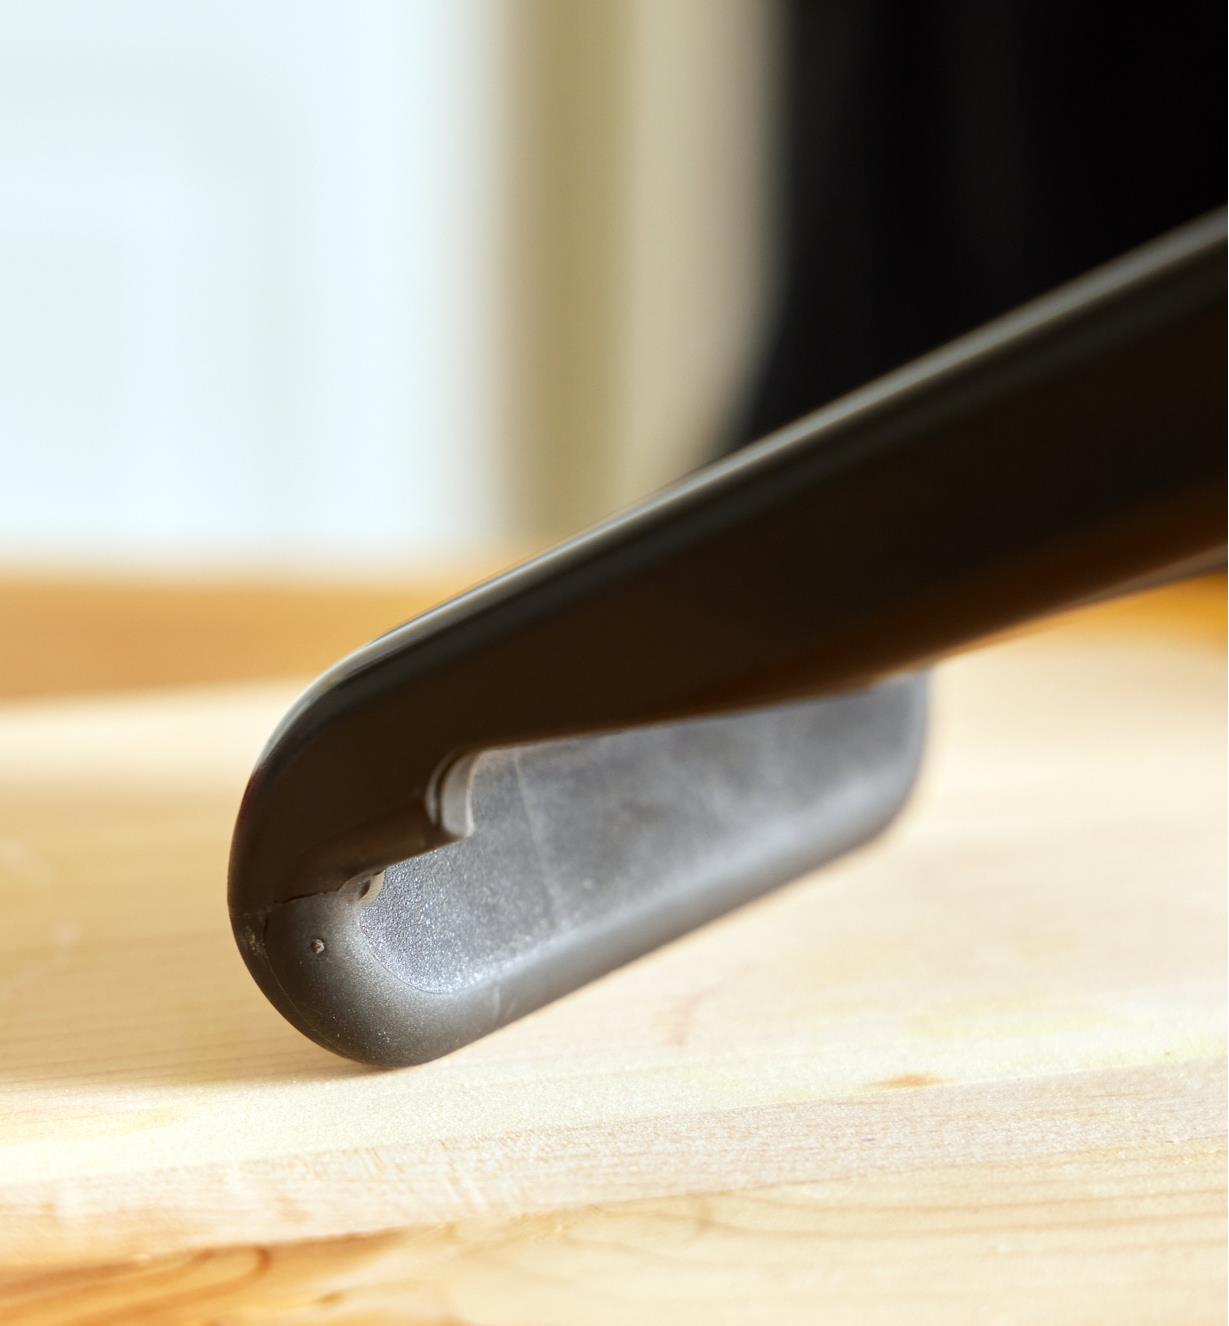 Close-up view of the non-slip edge on the body of the V-slicer with julienne blade